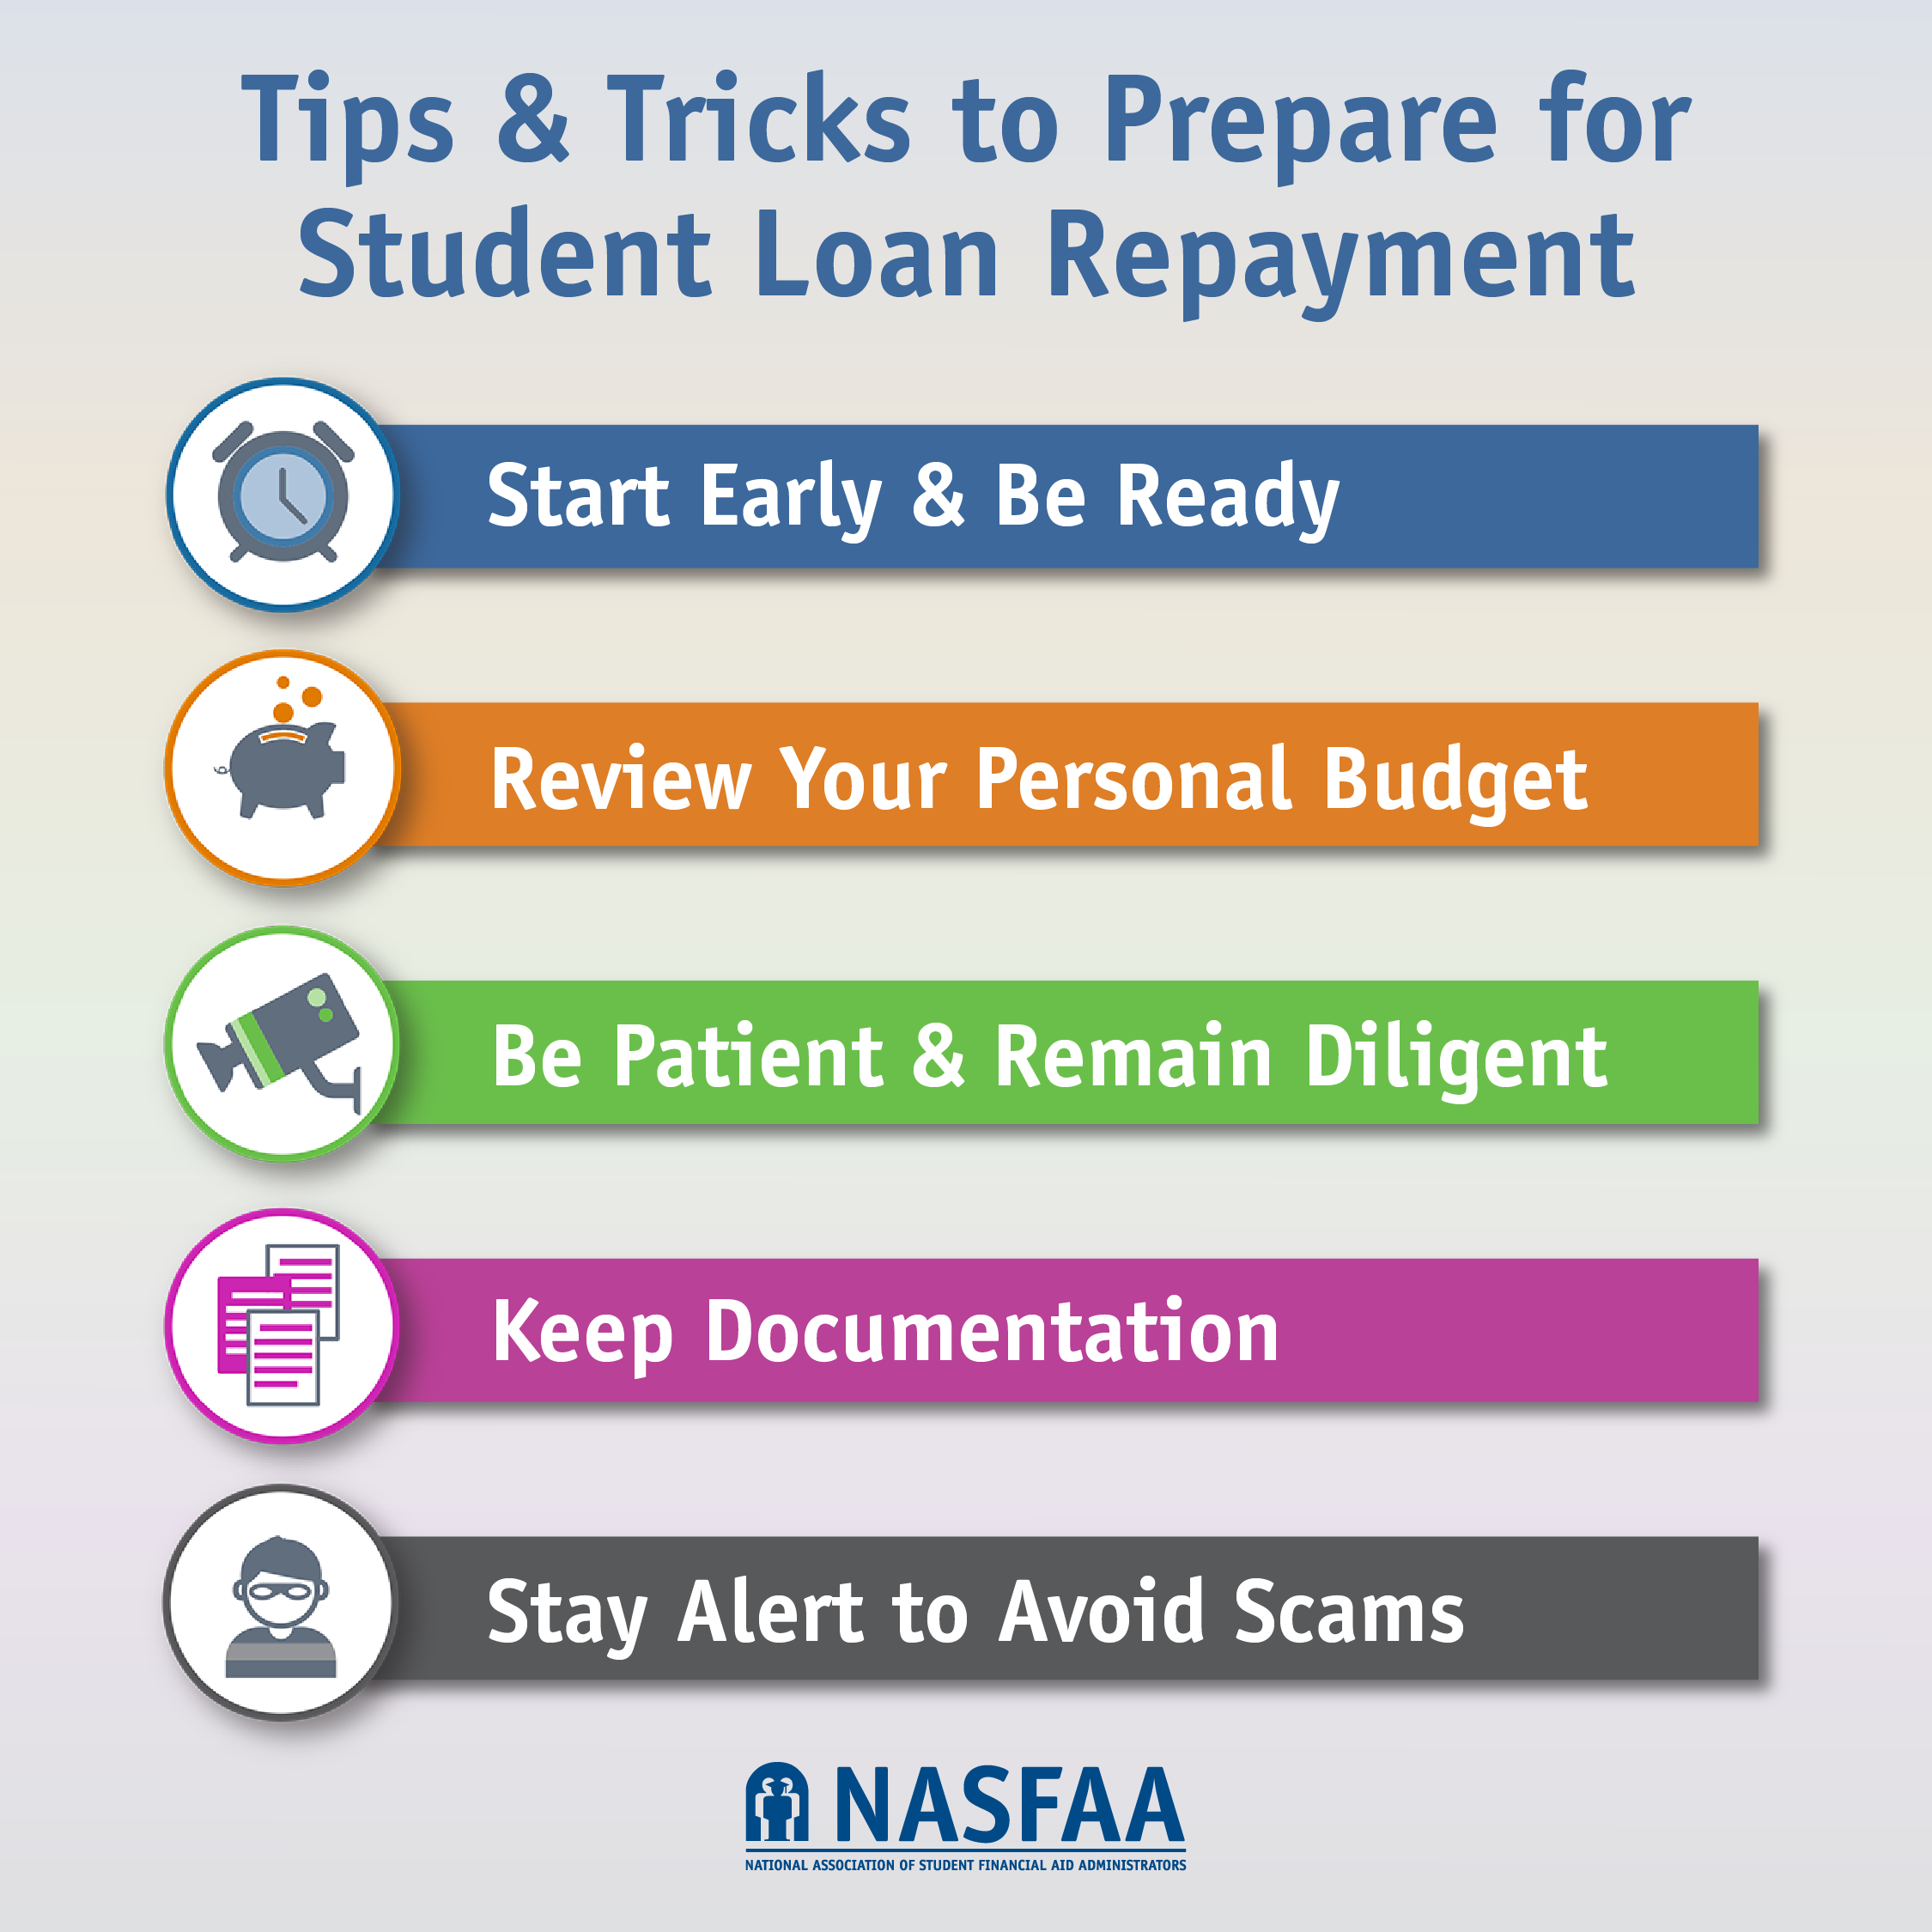 Tips and Tricks to Prepare for Loan Repayment infographic